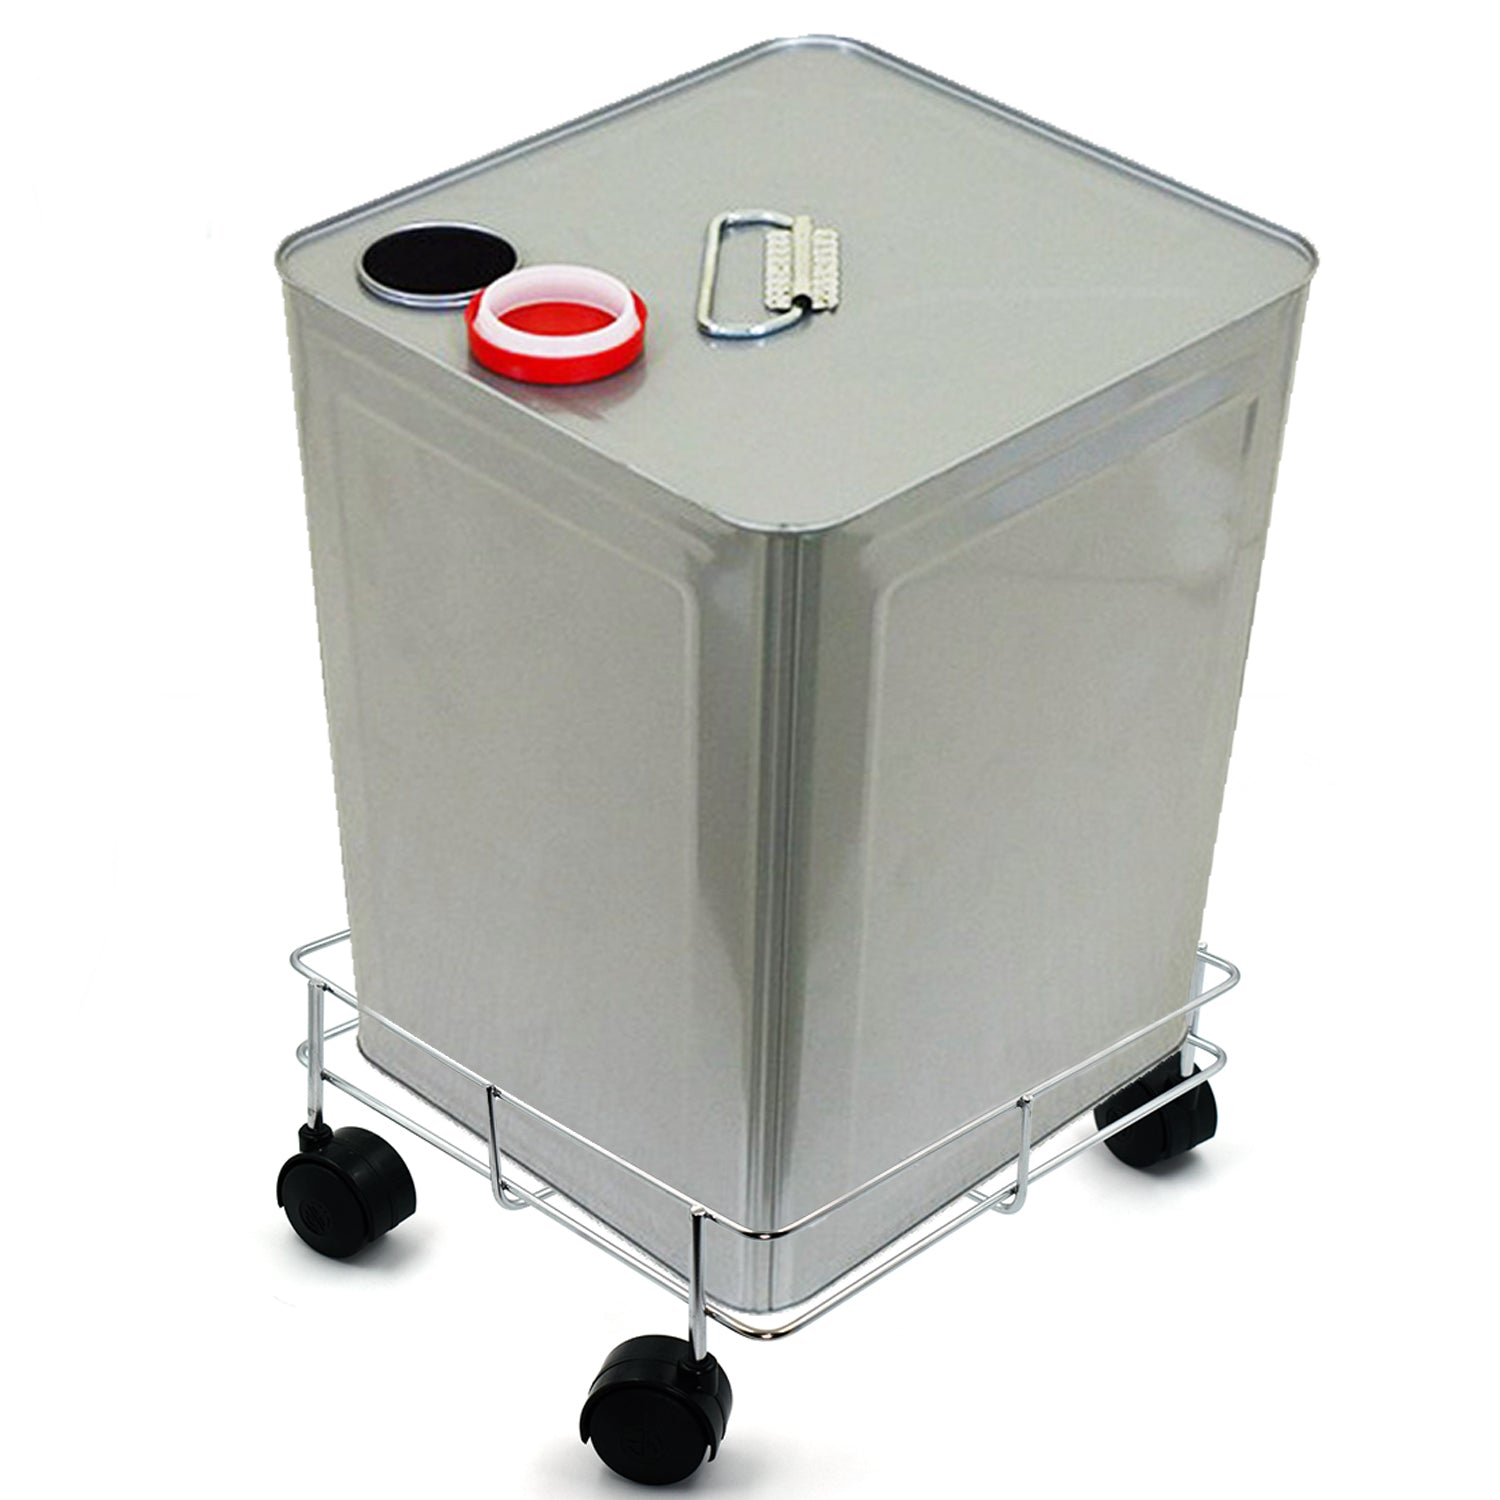 2787 Stainless steel Square Oil Stand For Carrying Oil Bottles And Jars Easily Without Any Problem. DeoDap